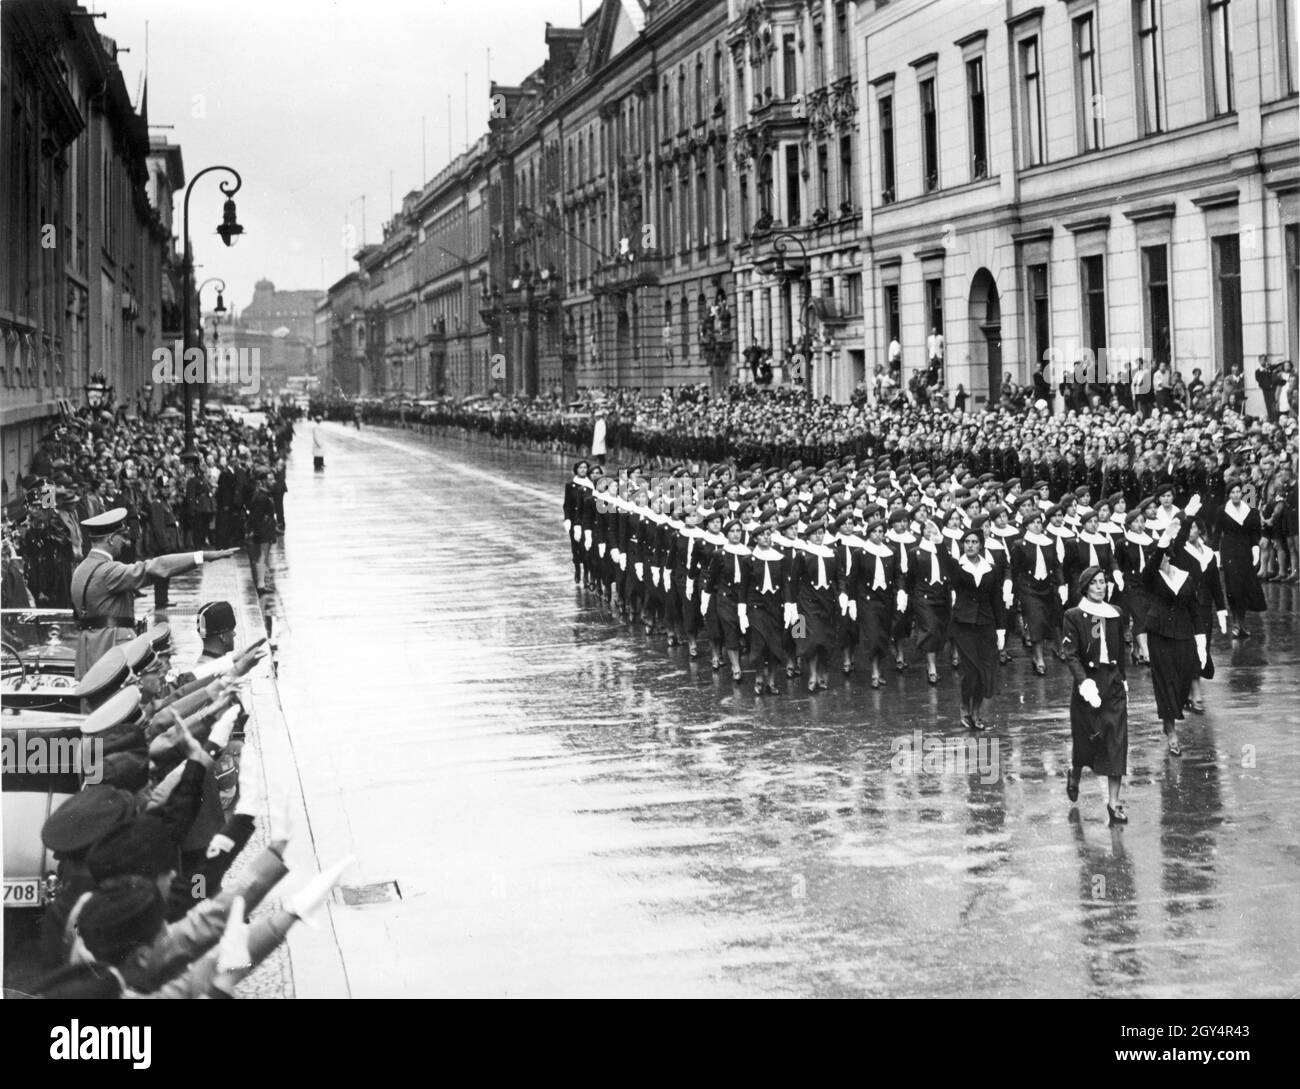 A corps of young fascists from the Opera Nazionale Balilla (youth organization of the Italian fascists) marches through Wilhelmstraße in Berlin-Mitte on June 16, 1937, passing Adolf Hitler (standing in the Mercedes-Benz), people from the NSDAP, SS and Italian fascist organizations. The view goes north in the direction of Unter den Linden. [automated translation] Stock Photo